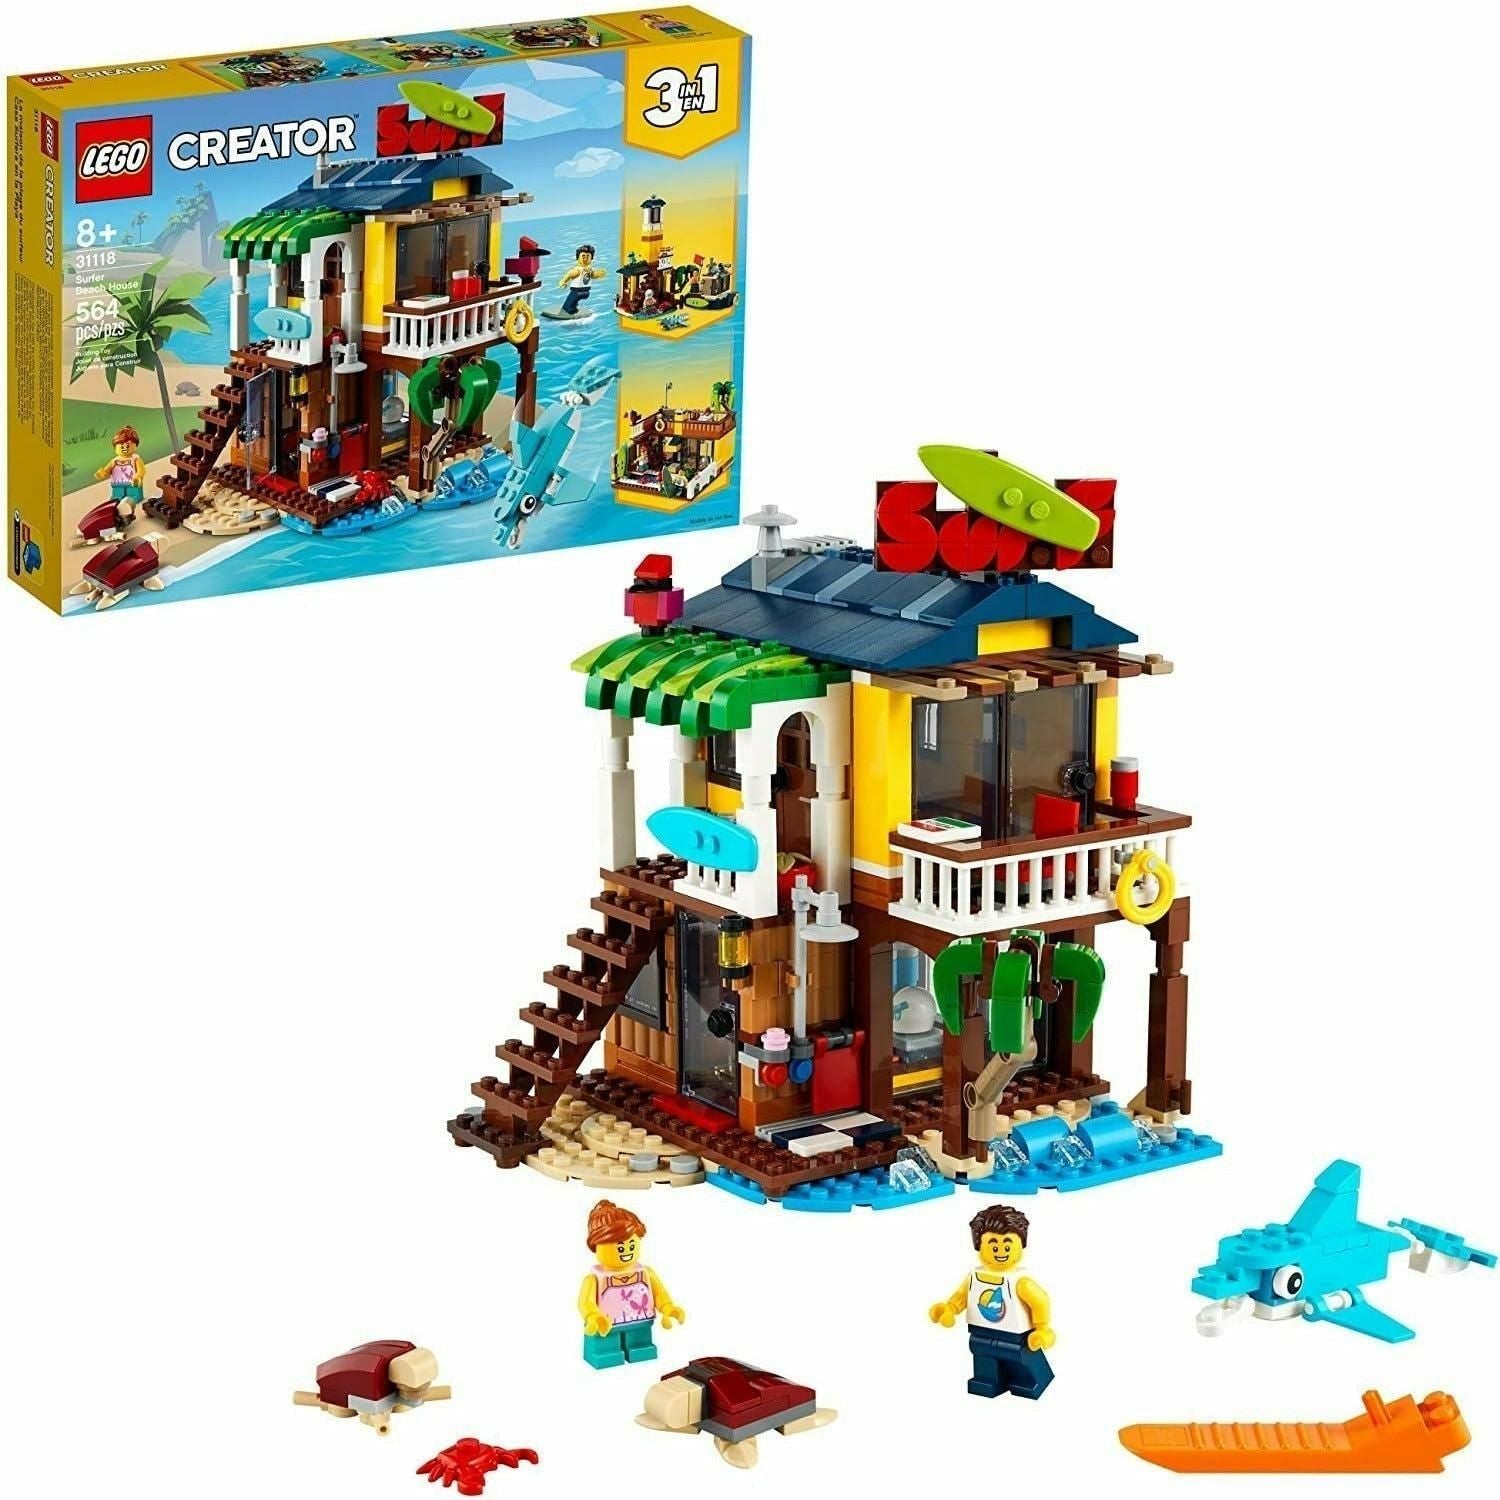 LEGO Creator 3in1 Surfer Beach House 31118 Building Kit Featuring Beach Hut and Animal Toys (564 Pieces) - BumbleToys - 8-13 Years, Boys, Creator 3in1, LEGO, OXE, Pre-Order